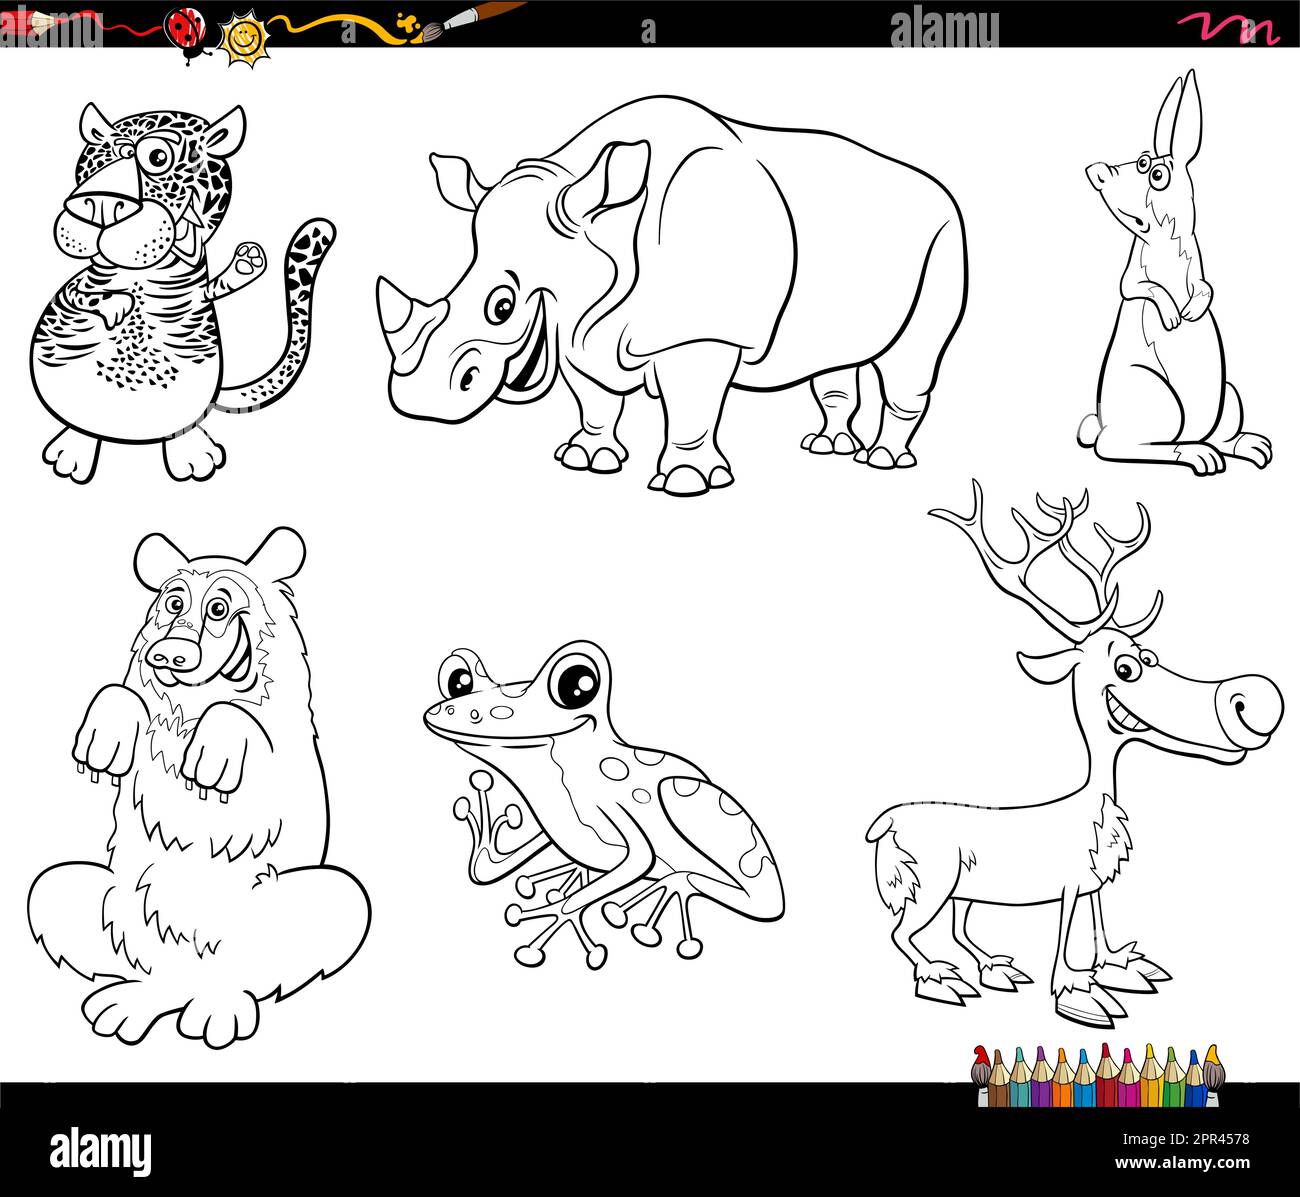 cartoon wild animals characters set coloring page Stock Vector